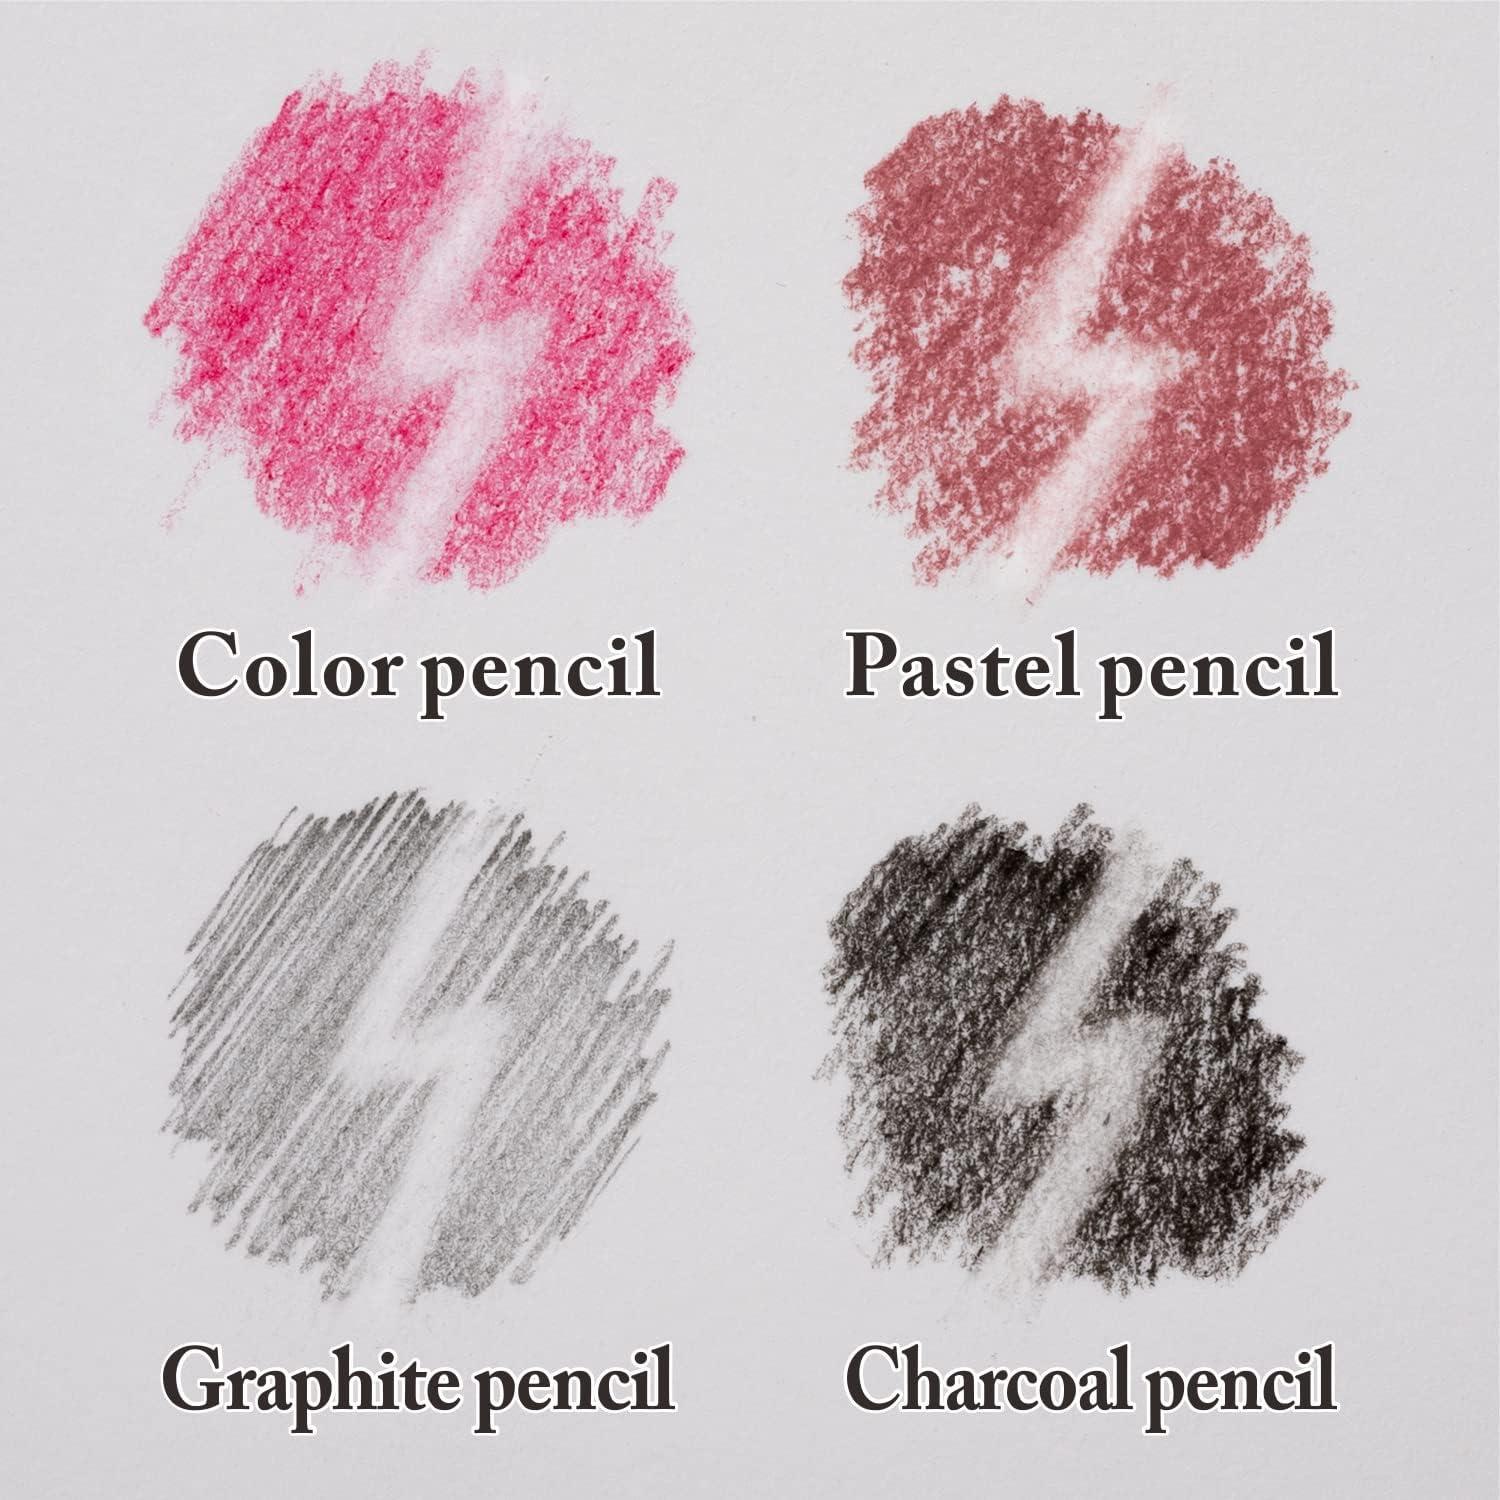 The Best And Worst Erasers For Artists of Graphite, Colored Pencil,  Charcoal, Pastel and Carbon 